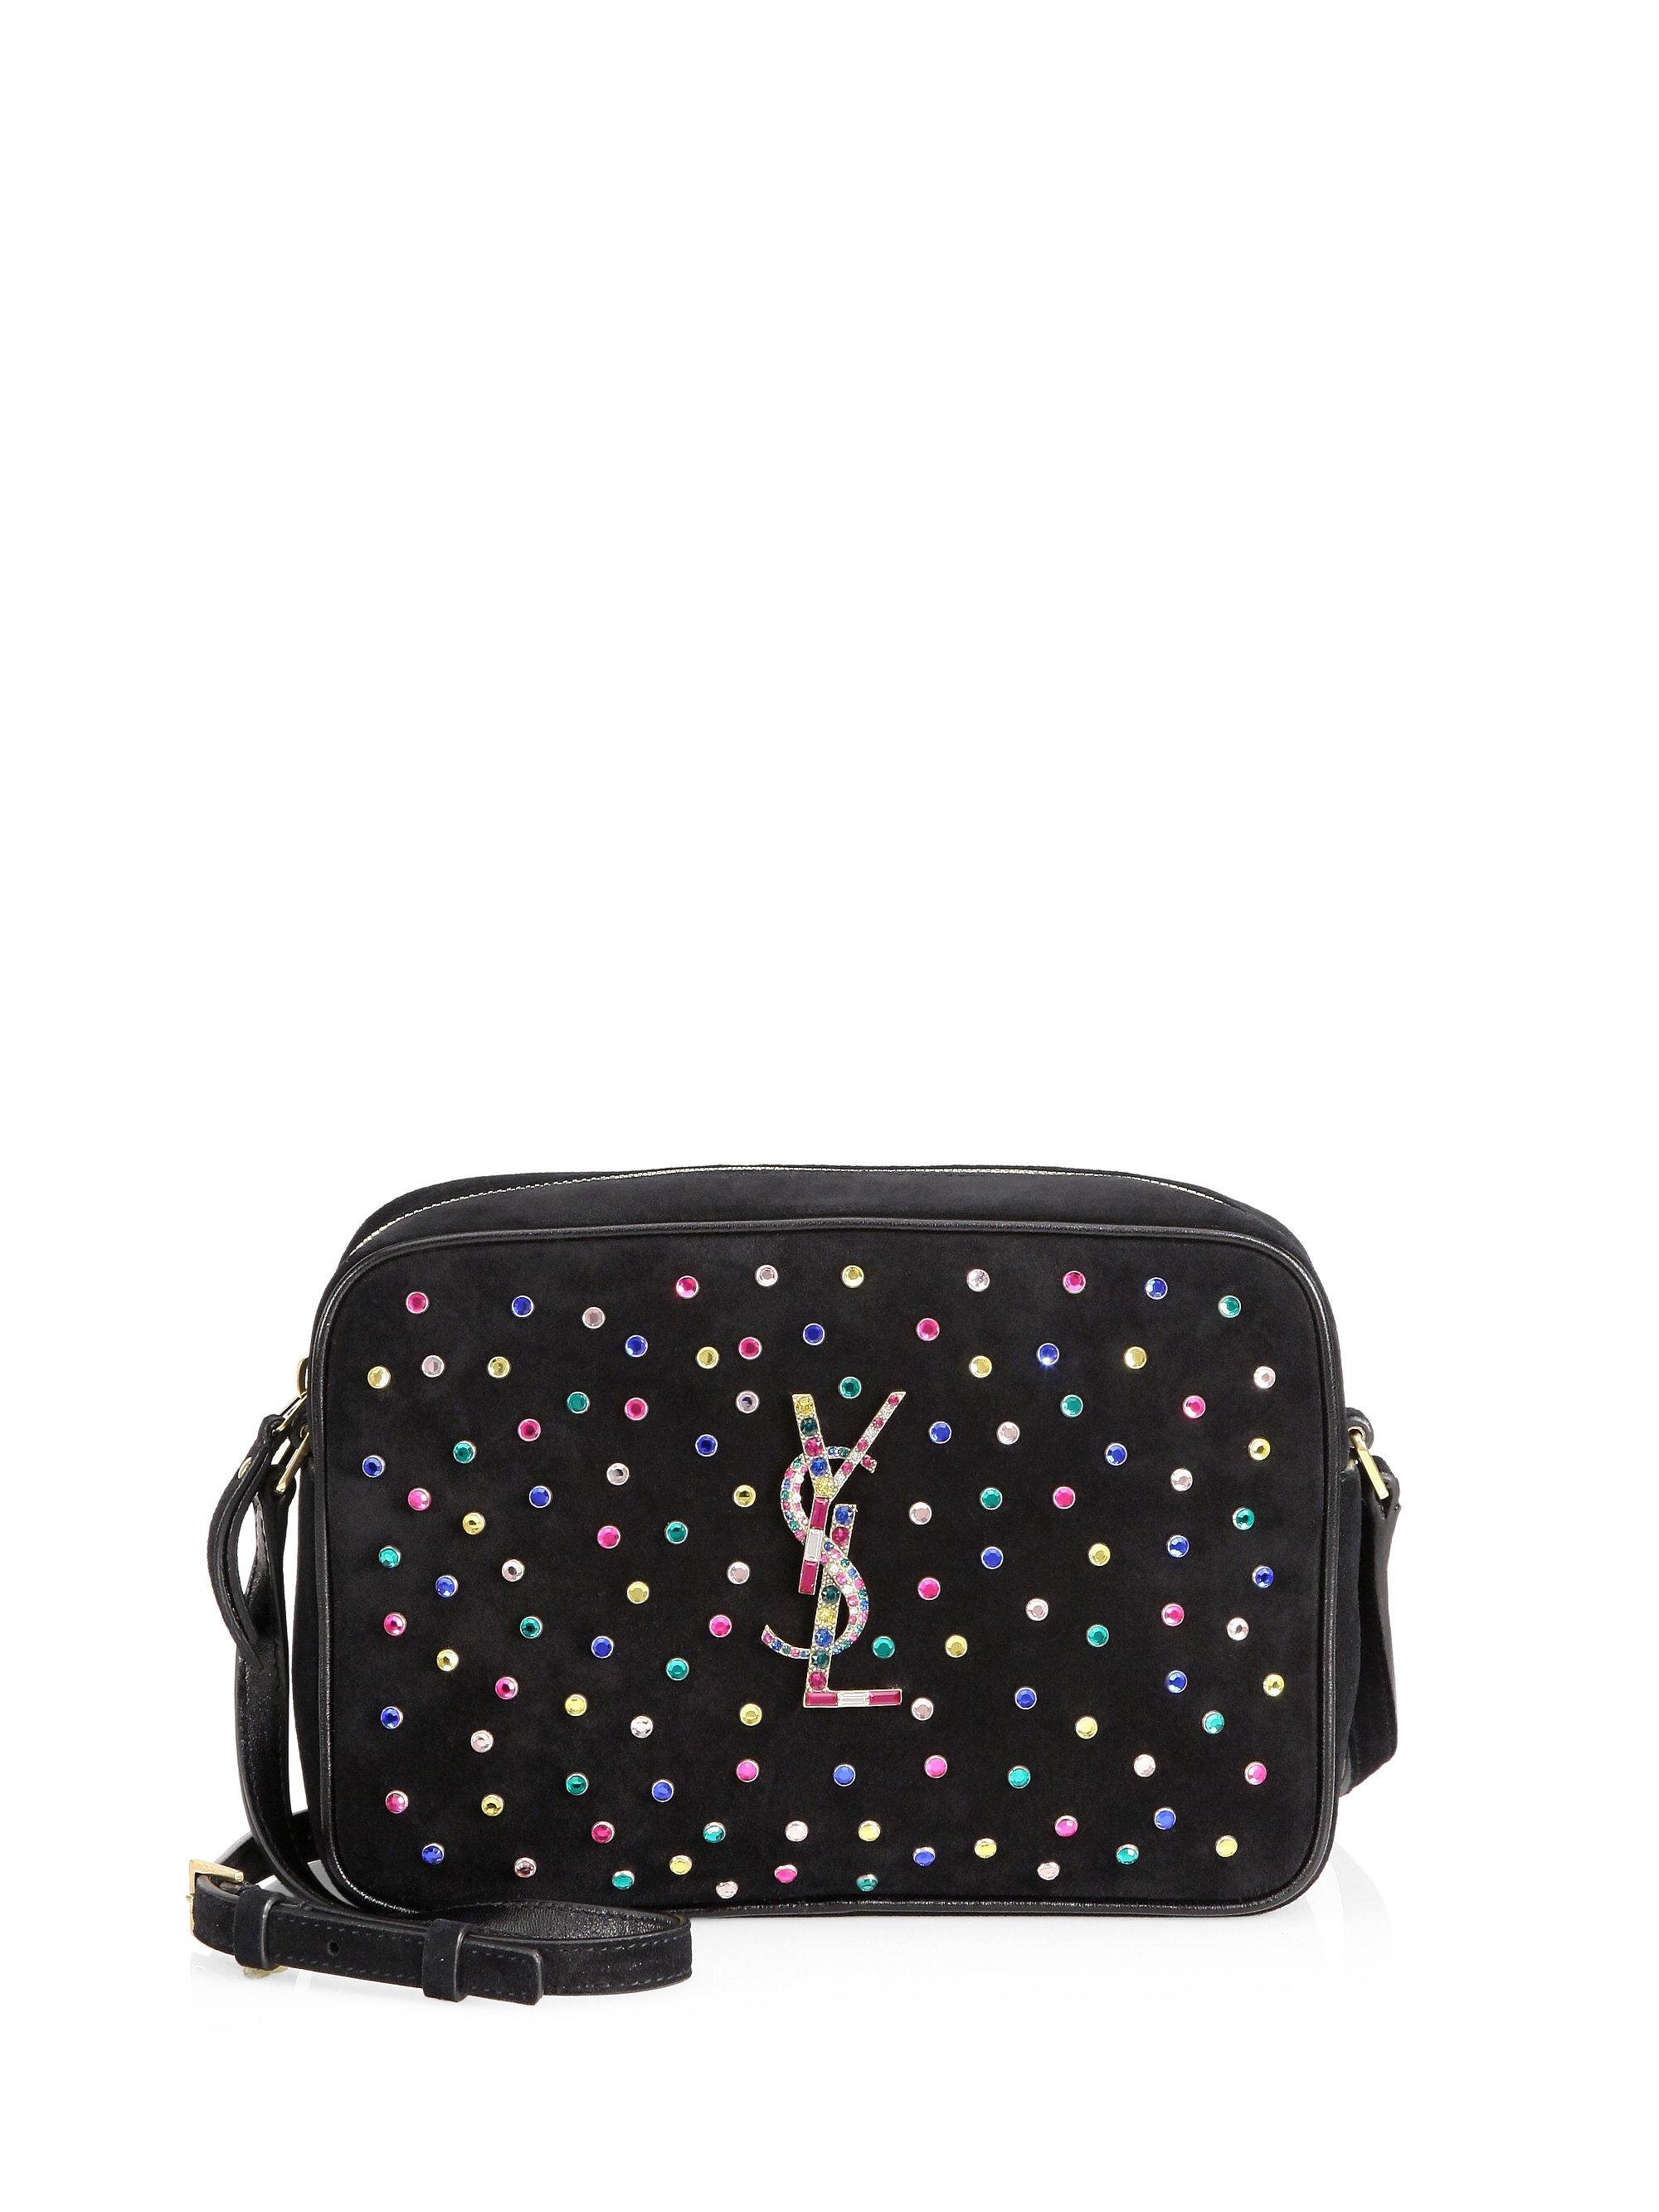 Saint Laurent Lou Bag in Black Leather with Studded Crystals.jpg